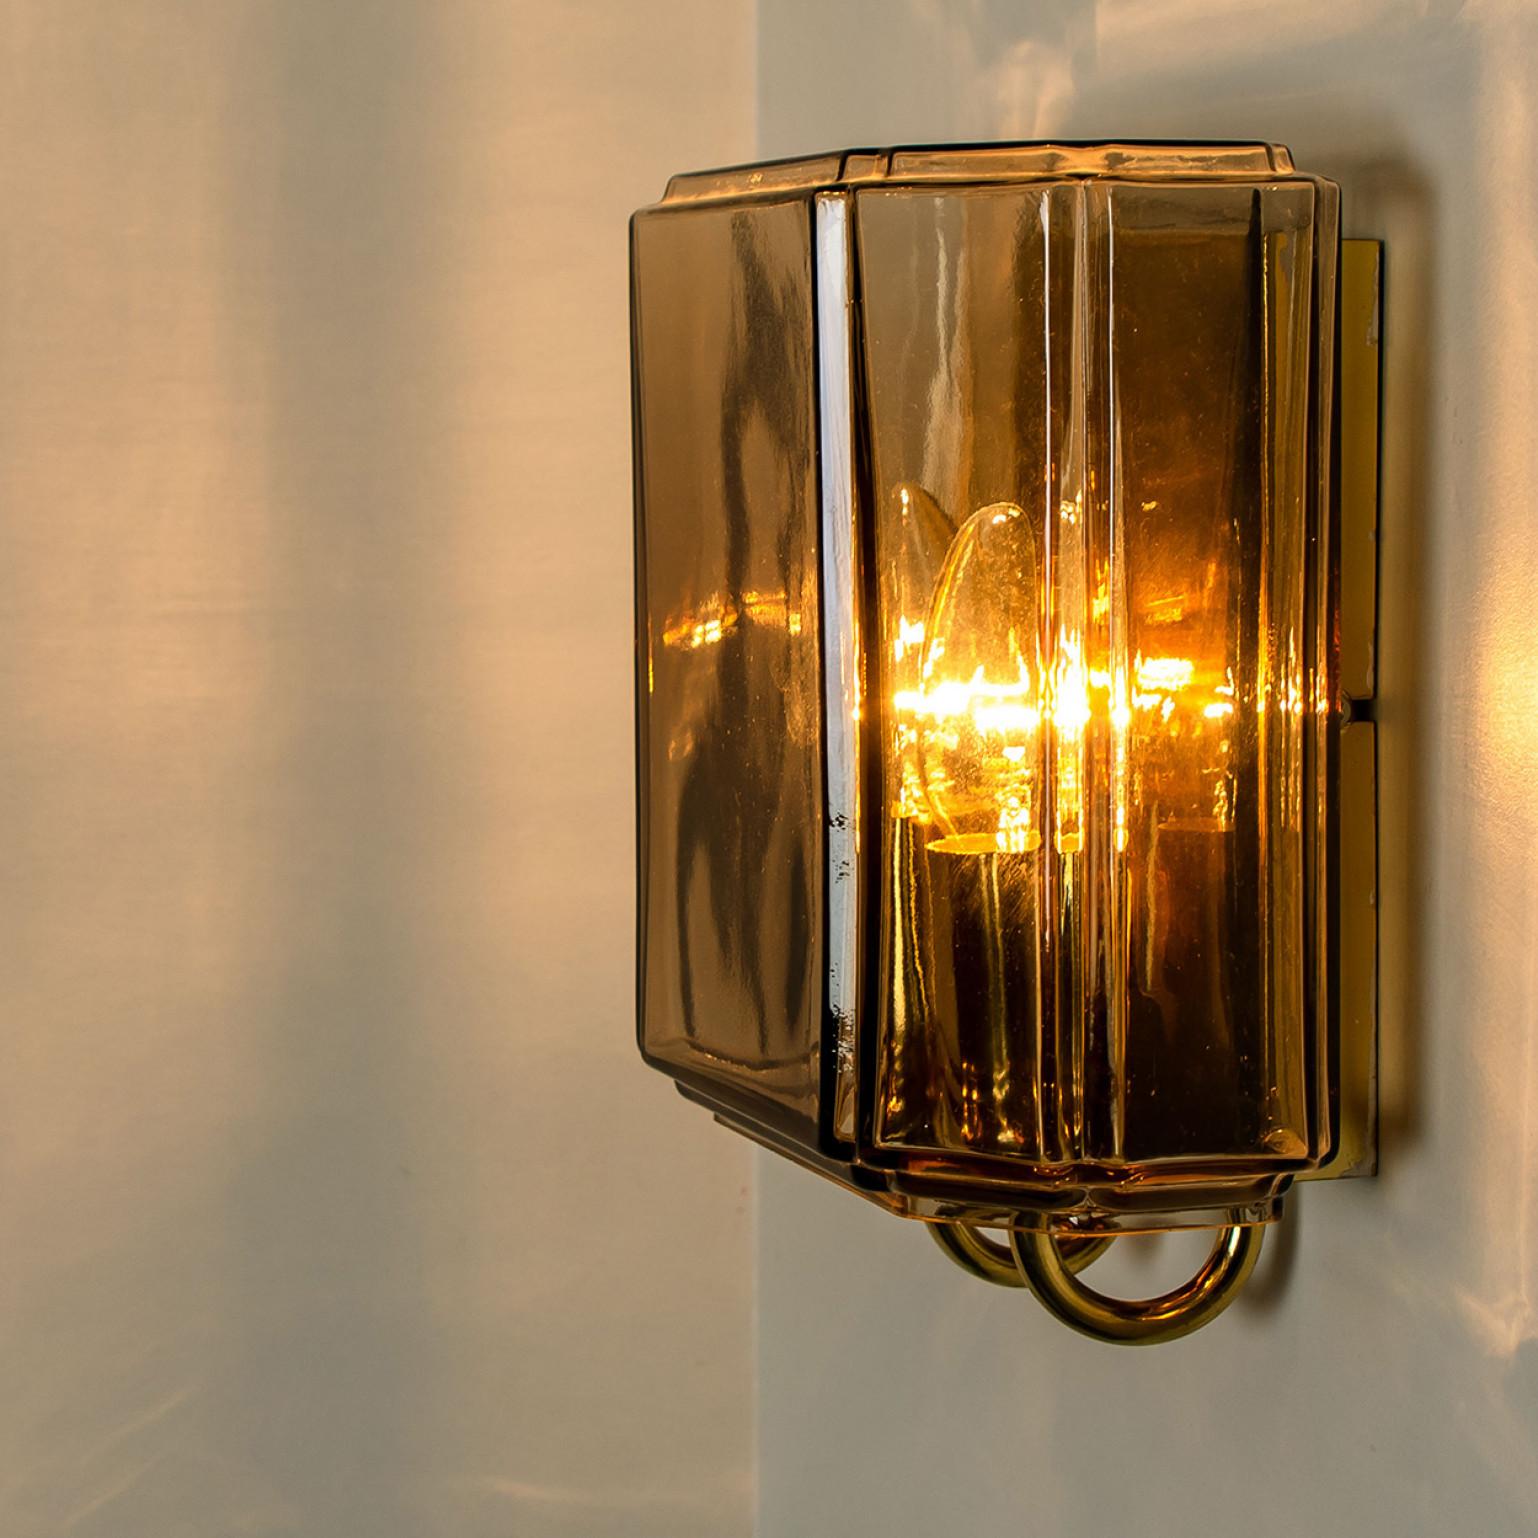 One of the two Pairs of Smoked Glass Wall Lights Sconces by Glashütte Limburg, 1 For Sale 5